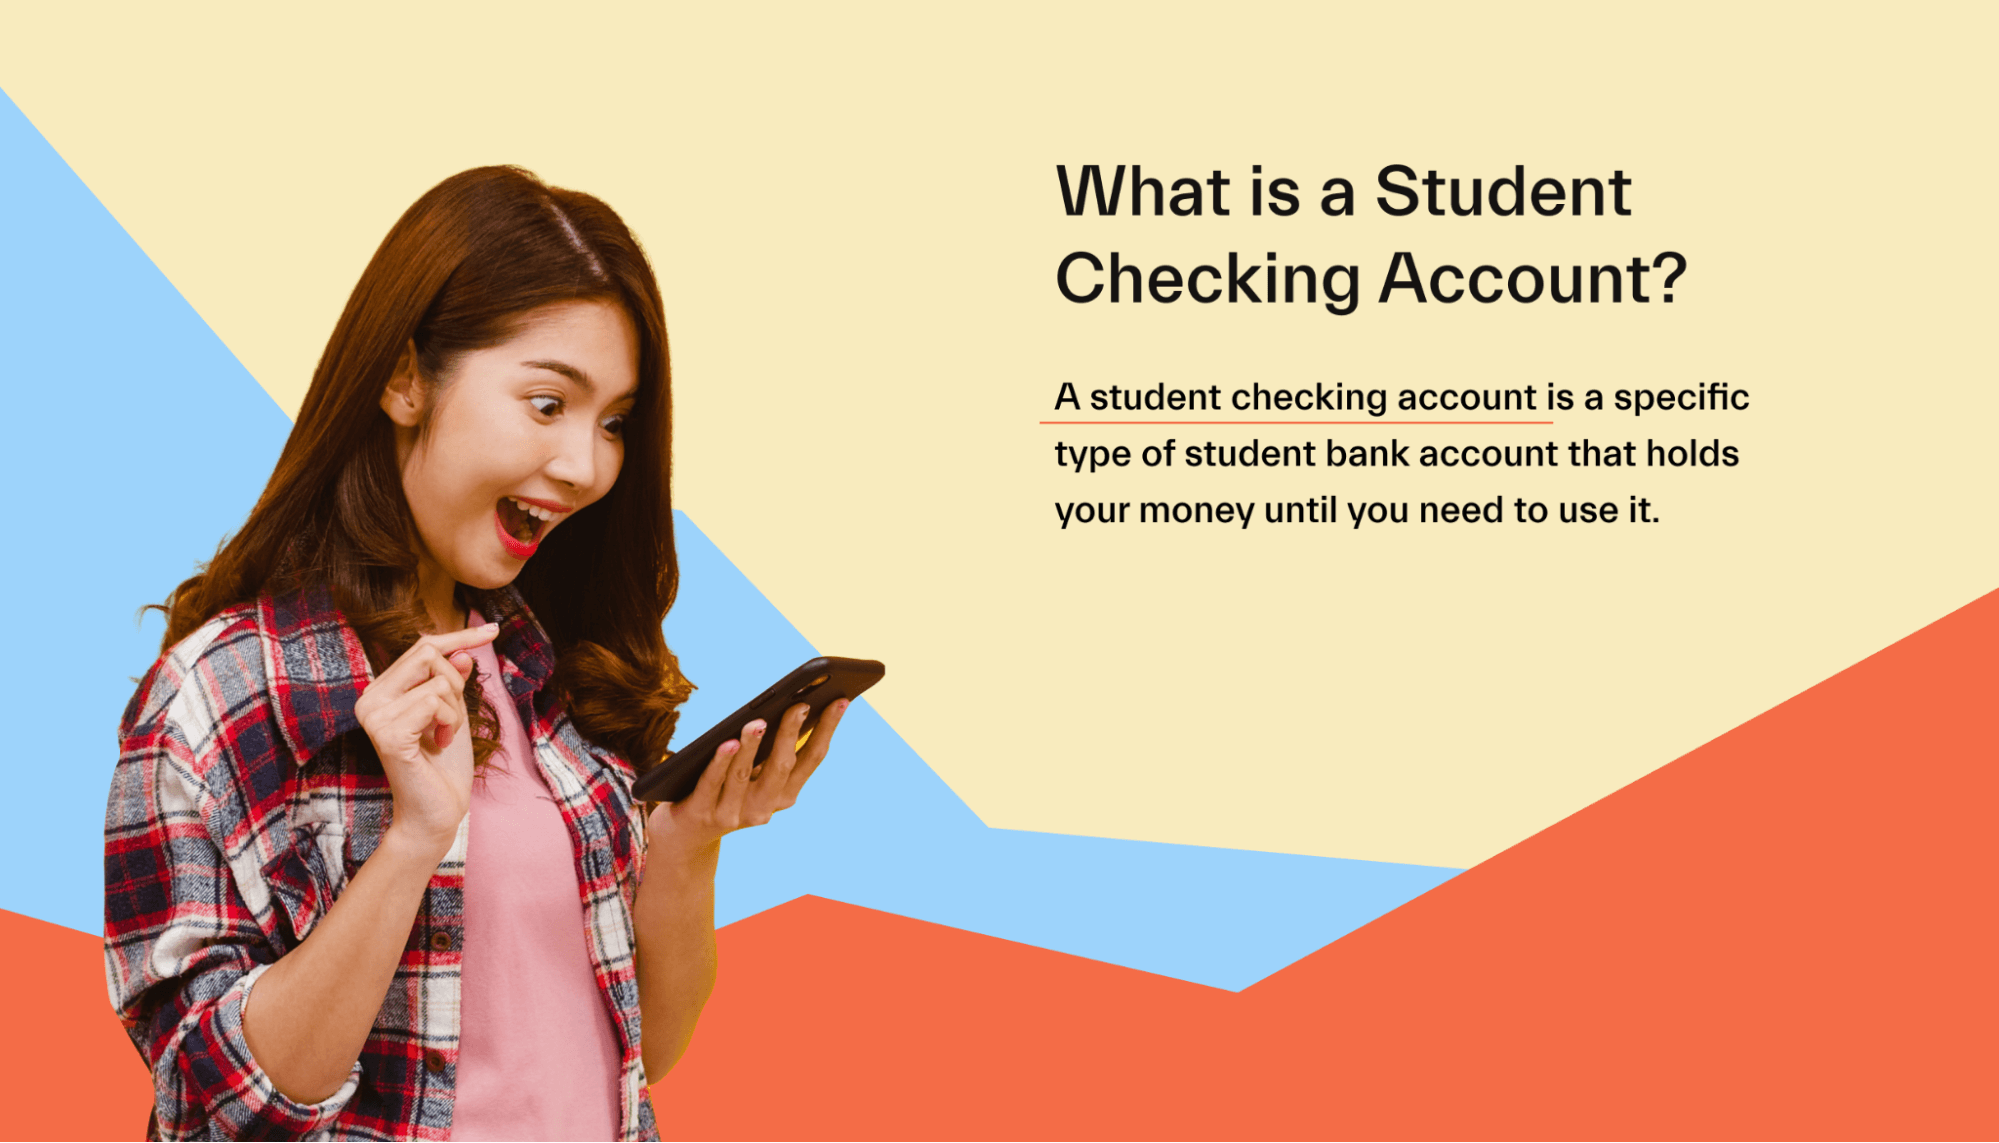 What is a Student Checking Account?